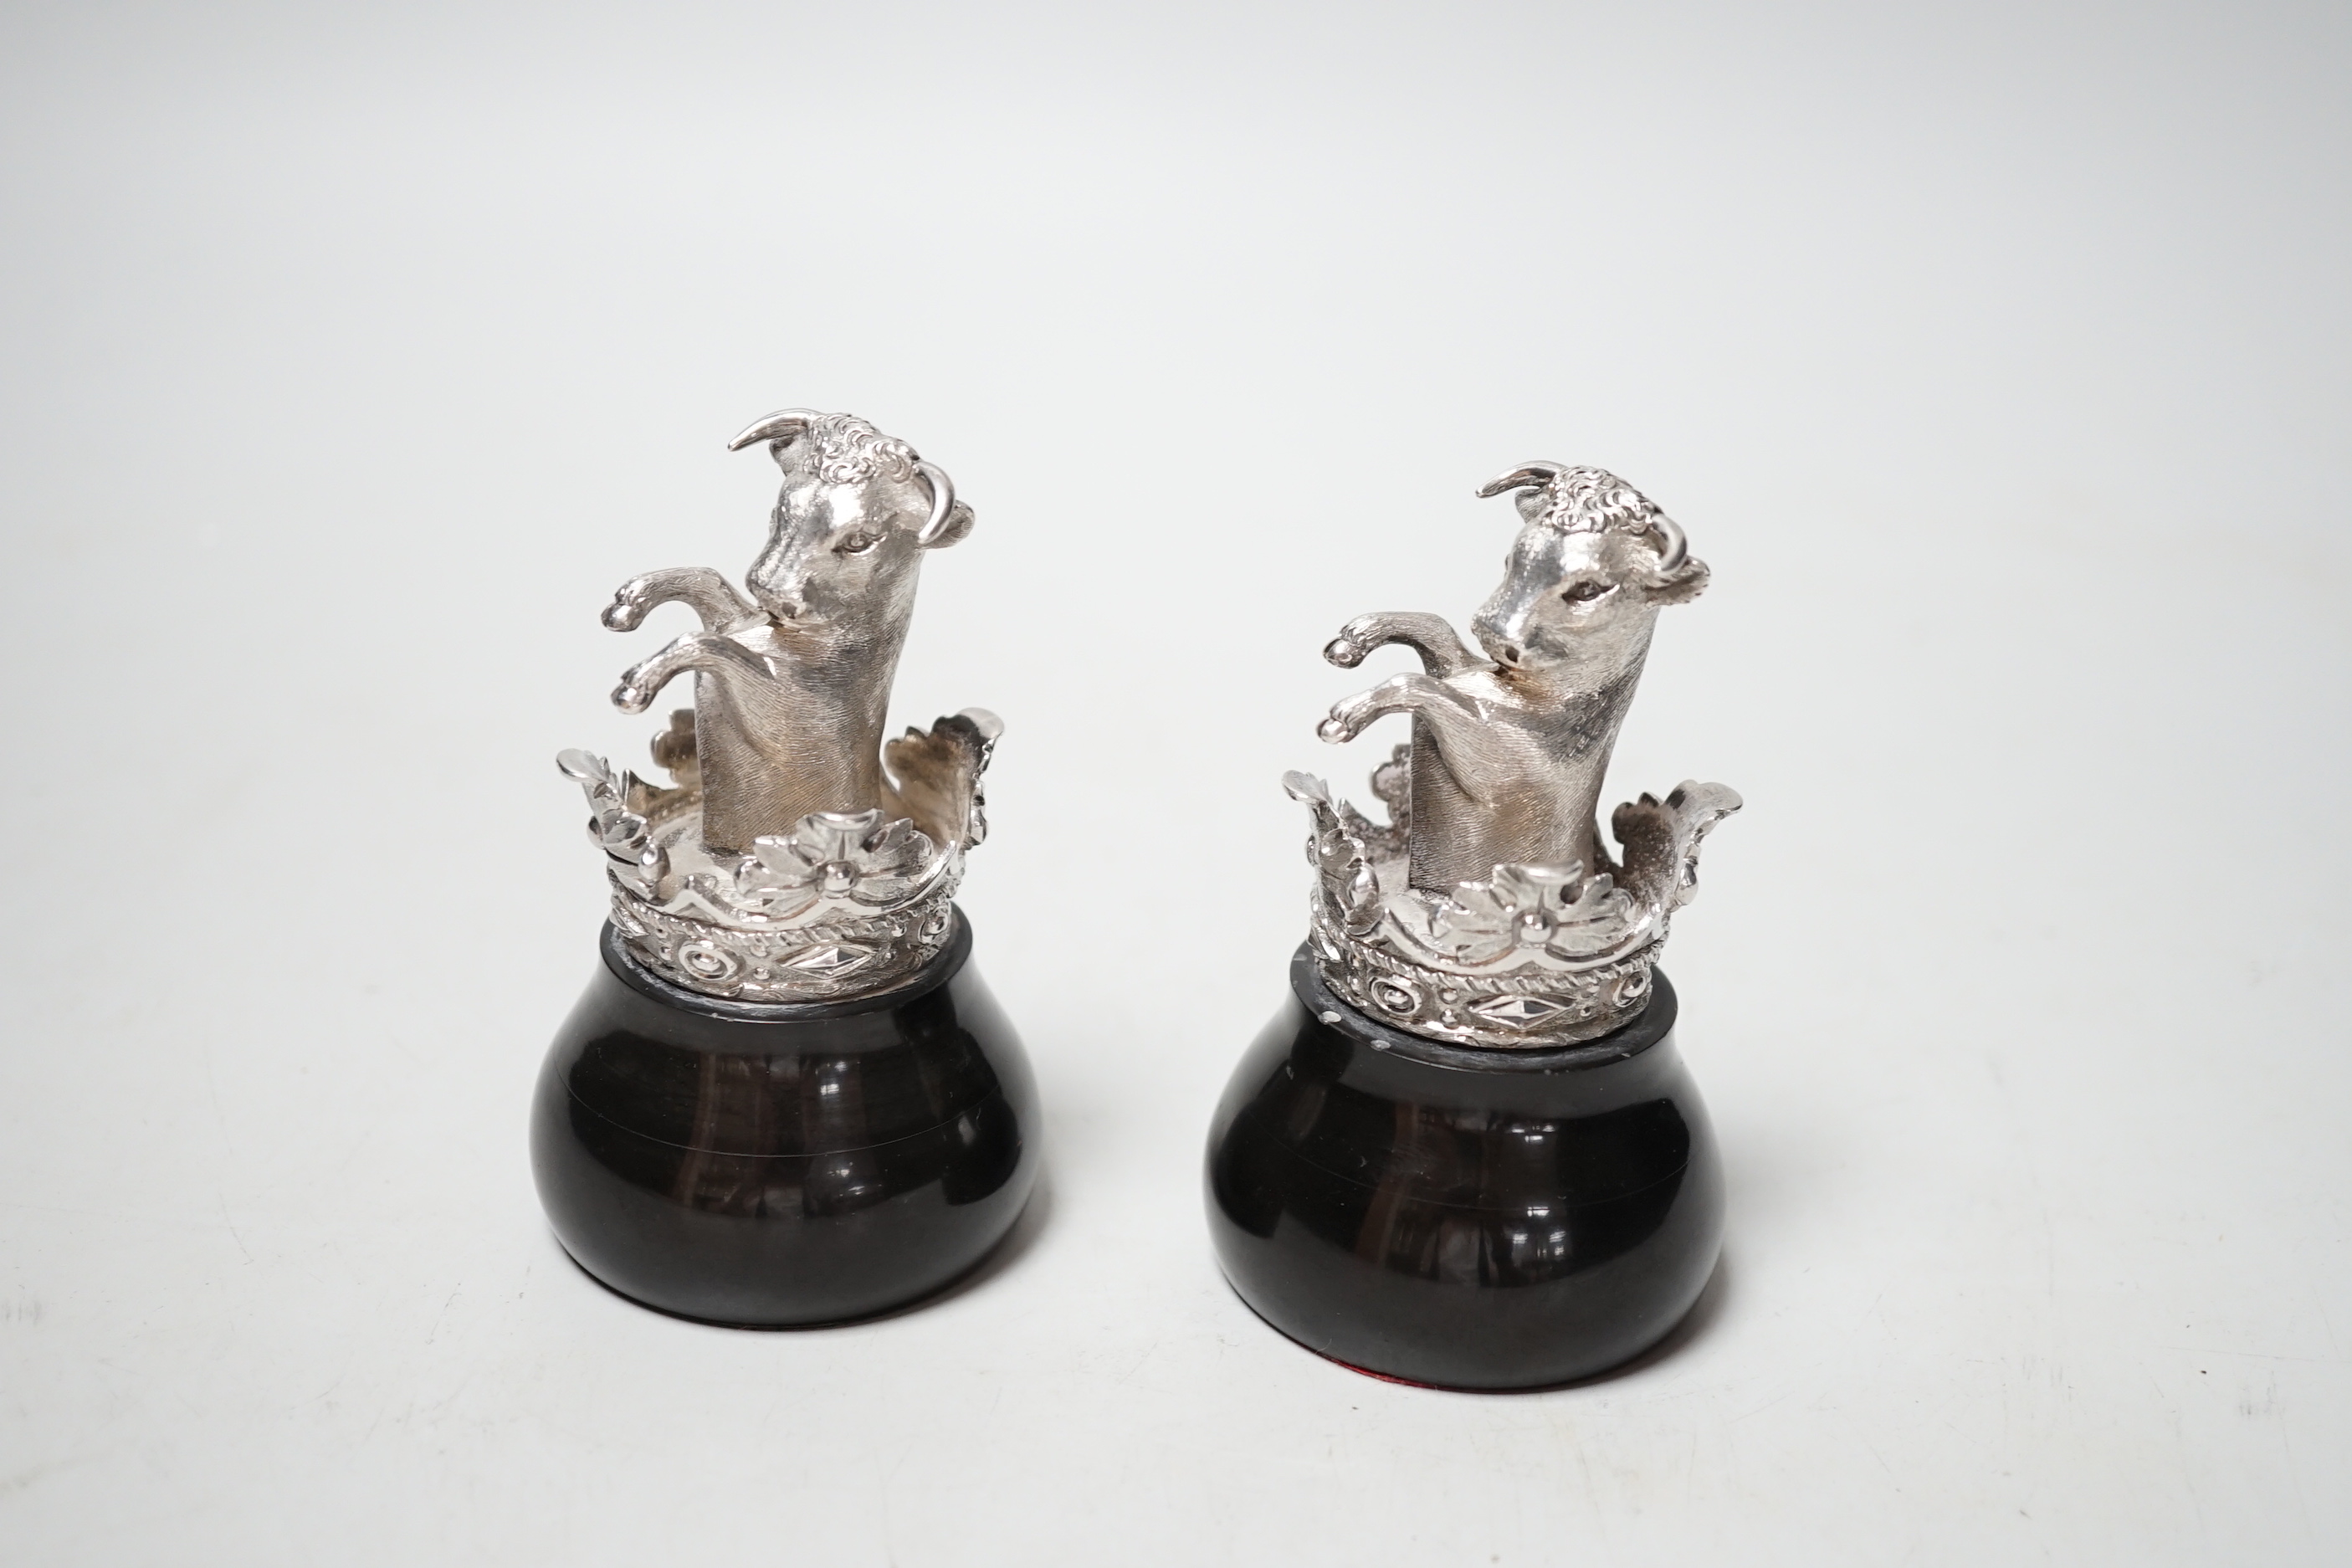 A pair of silver heraldic crests, modelled as rearing bull's within a coronet, on ebonised bases, probably copies of the pediments at Eridge Park, Kent, Mitchell Bosley & Co?, Birmingham, 1899, height 95mm.